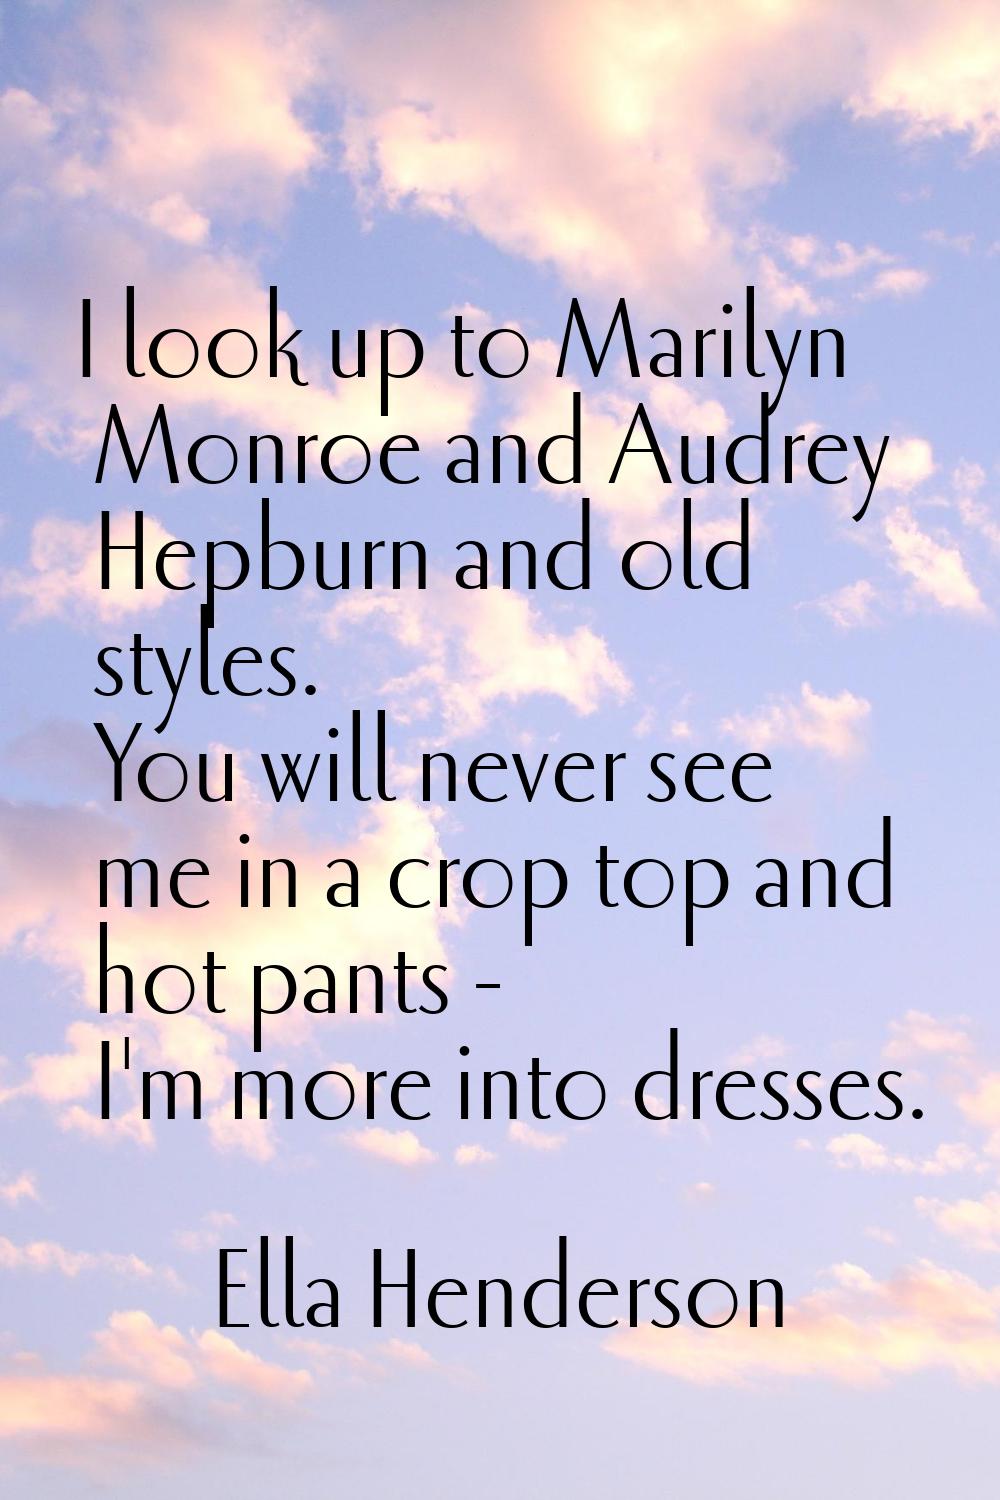 I look up to Marilyn Monroe and Audrey Hepburn and old styles. You will never see me in a crop top 